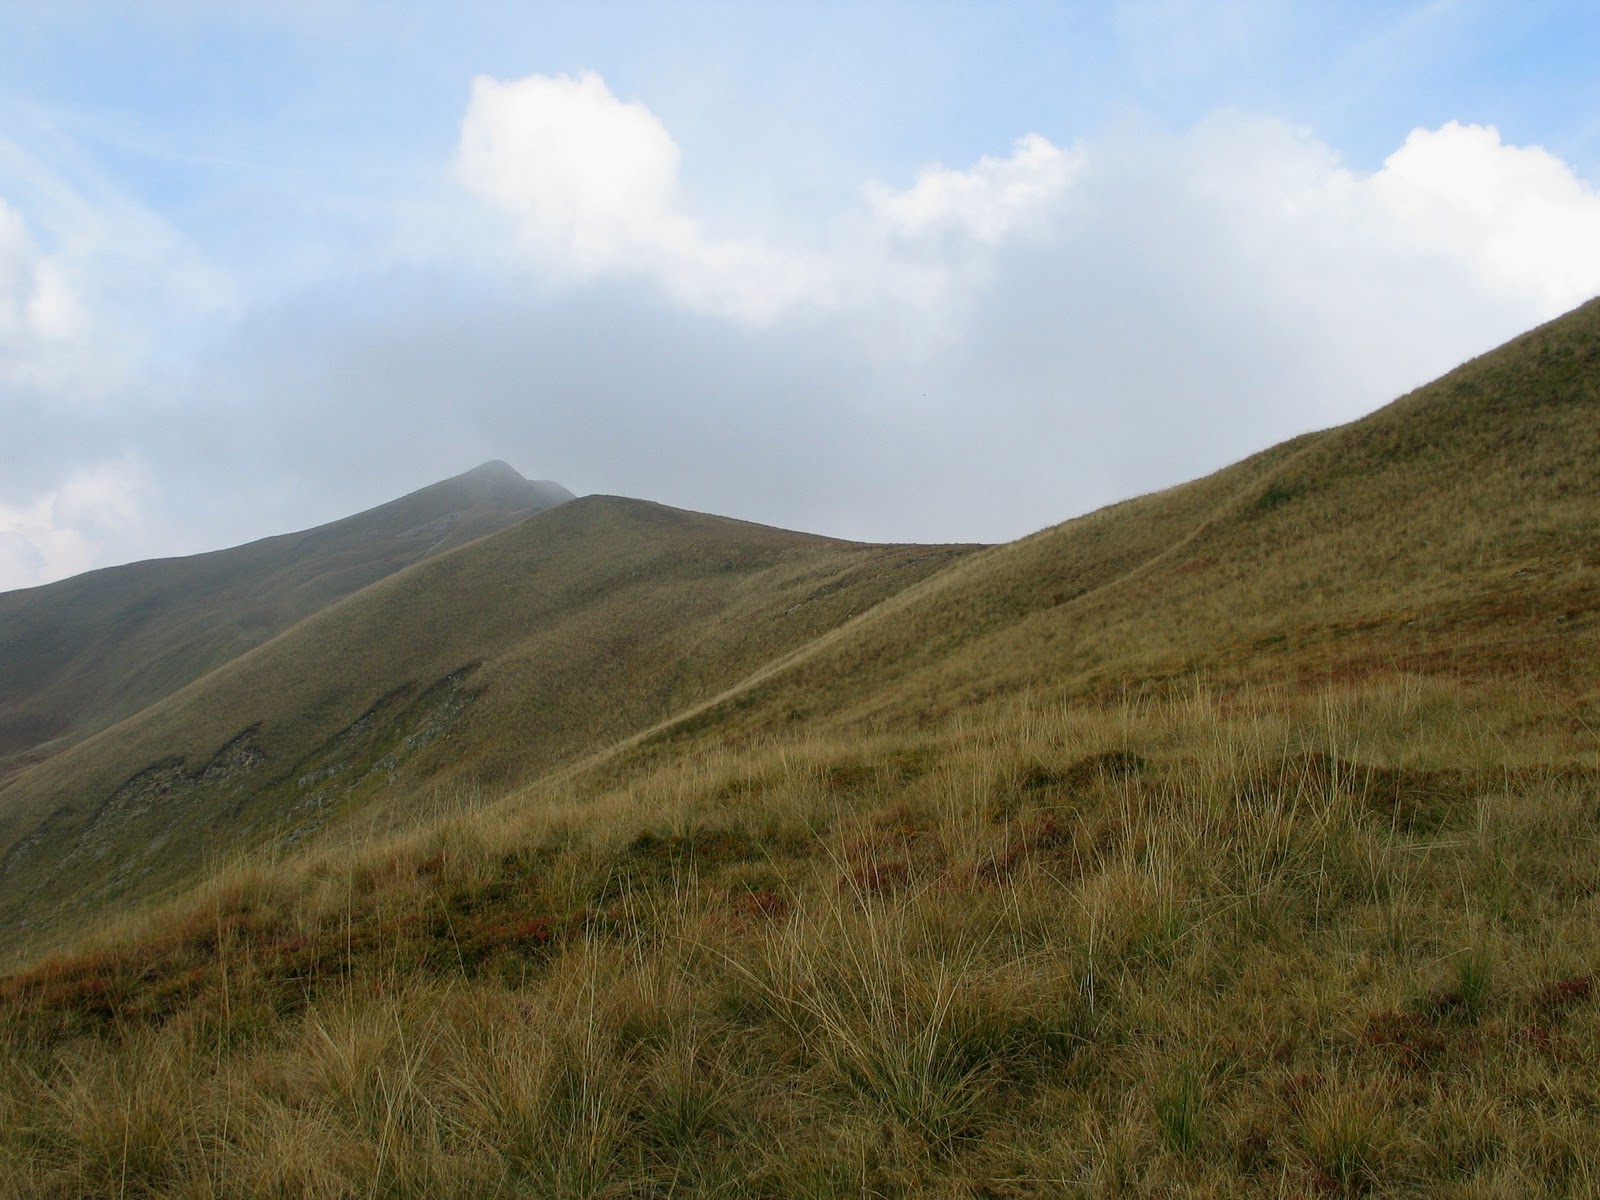 50 Hikes In and Around Tuscany: Hikes of the Northern Apennines